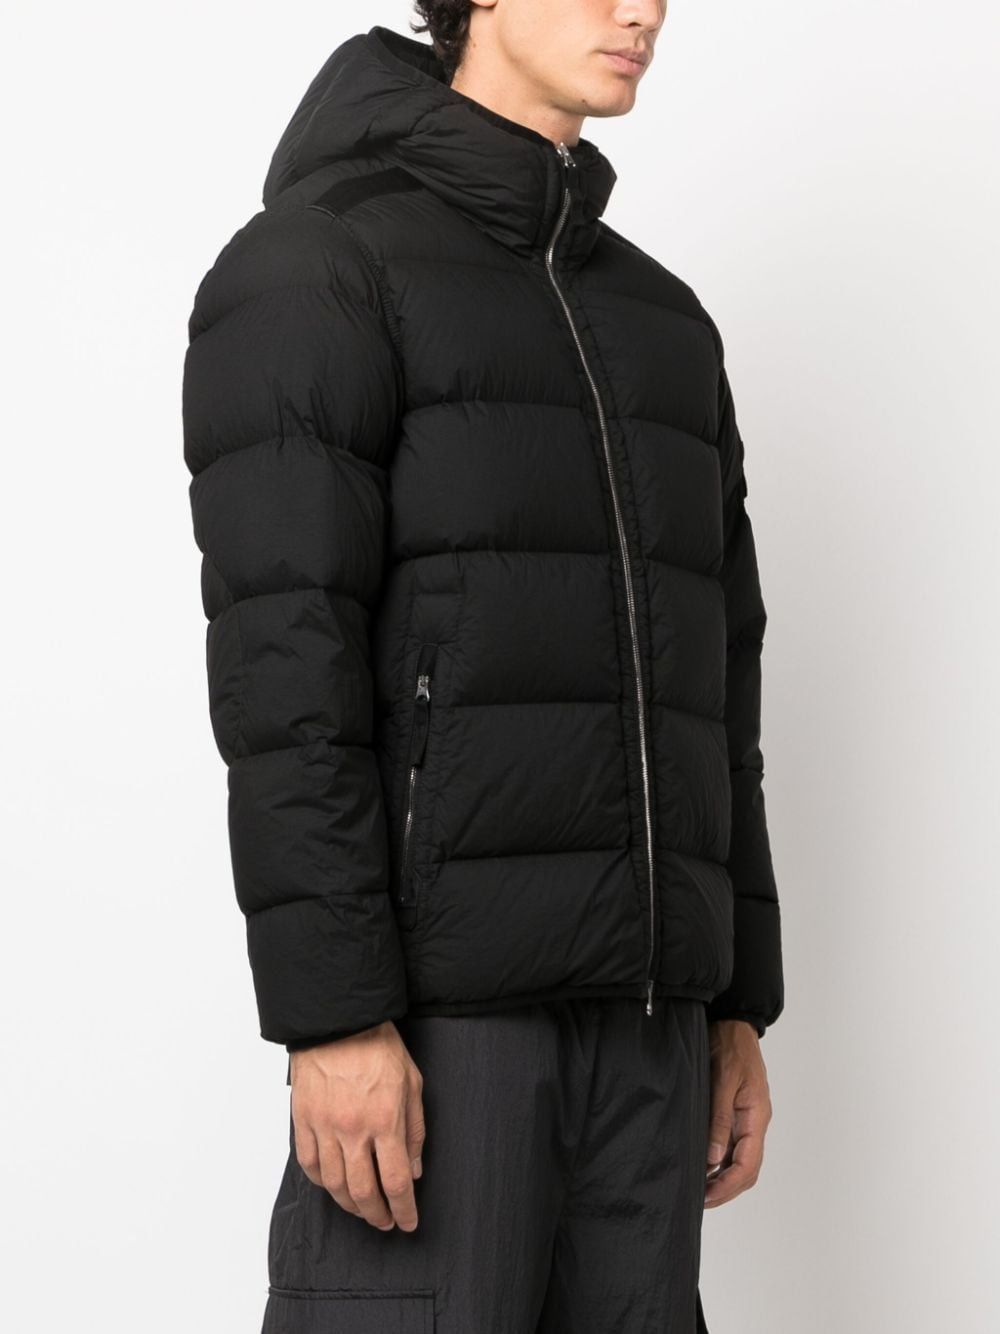 STONE ISLAND Black Hooded Nylon Down Jacket for Men - FW23 Collection